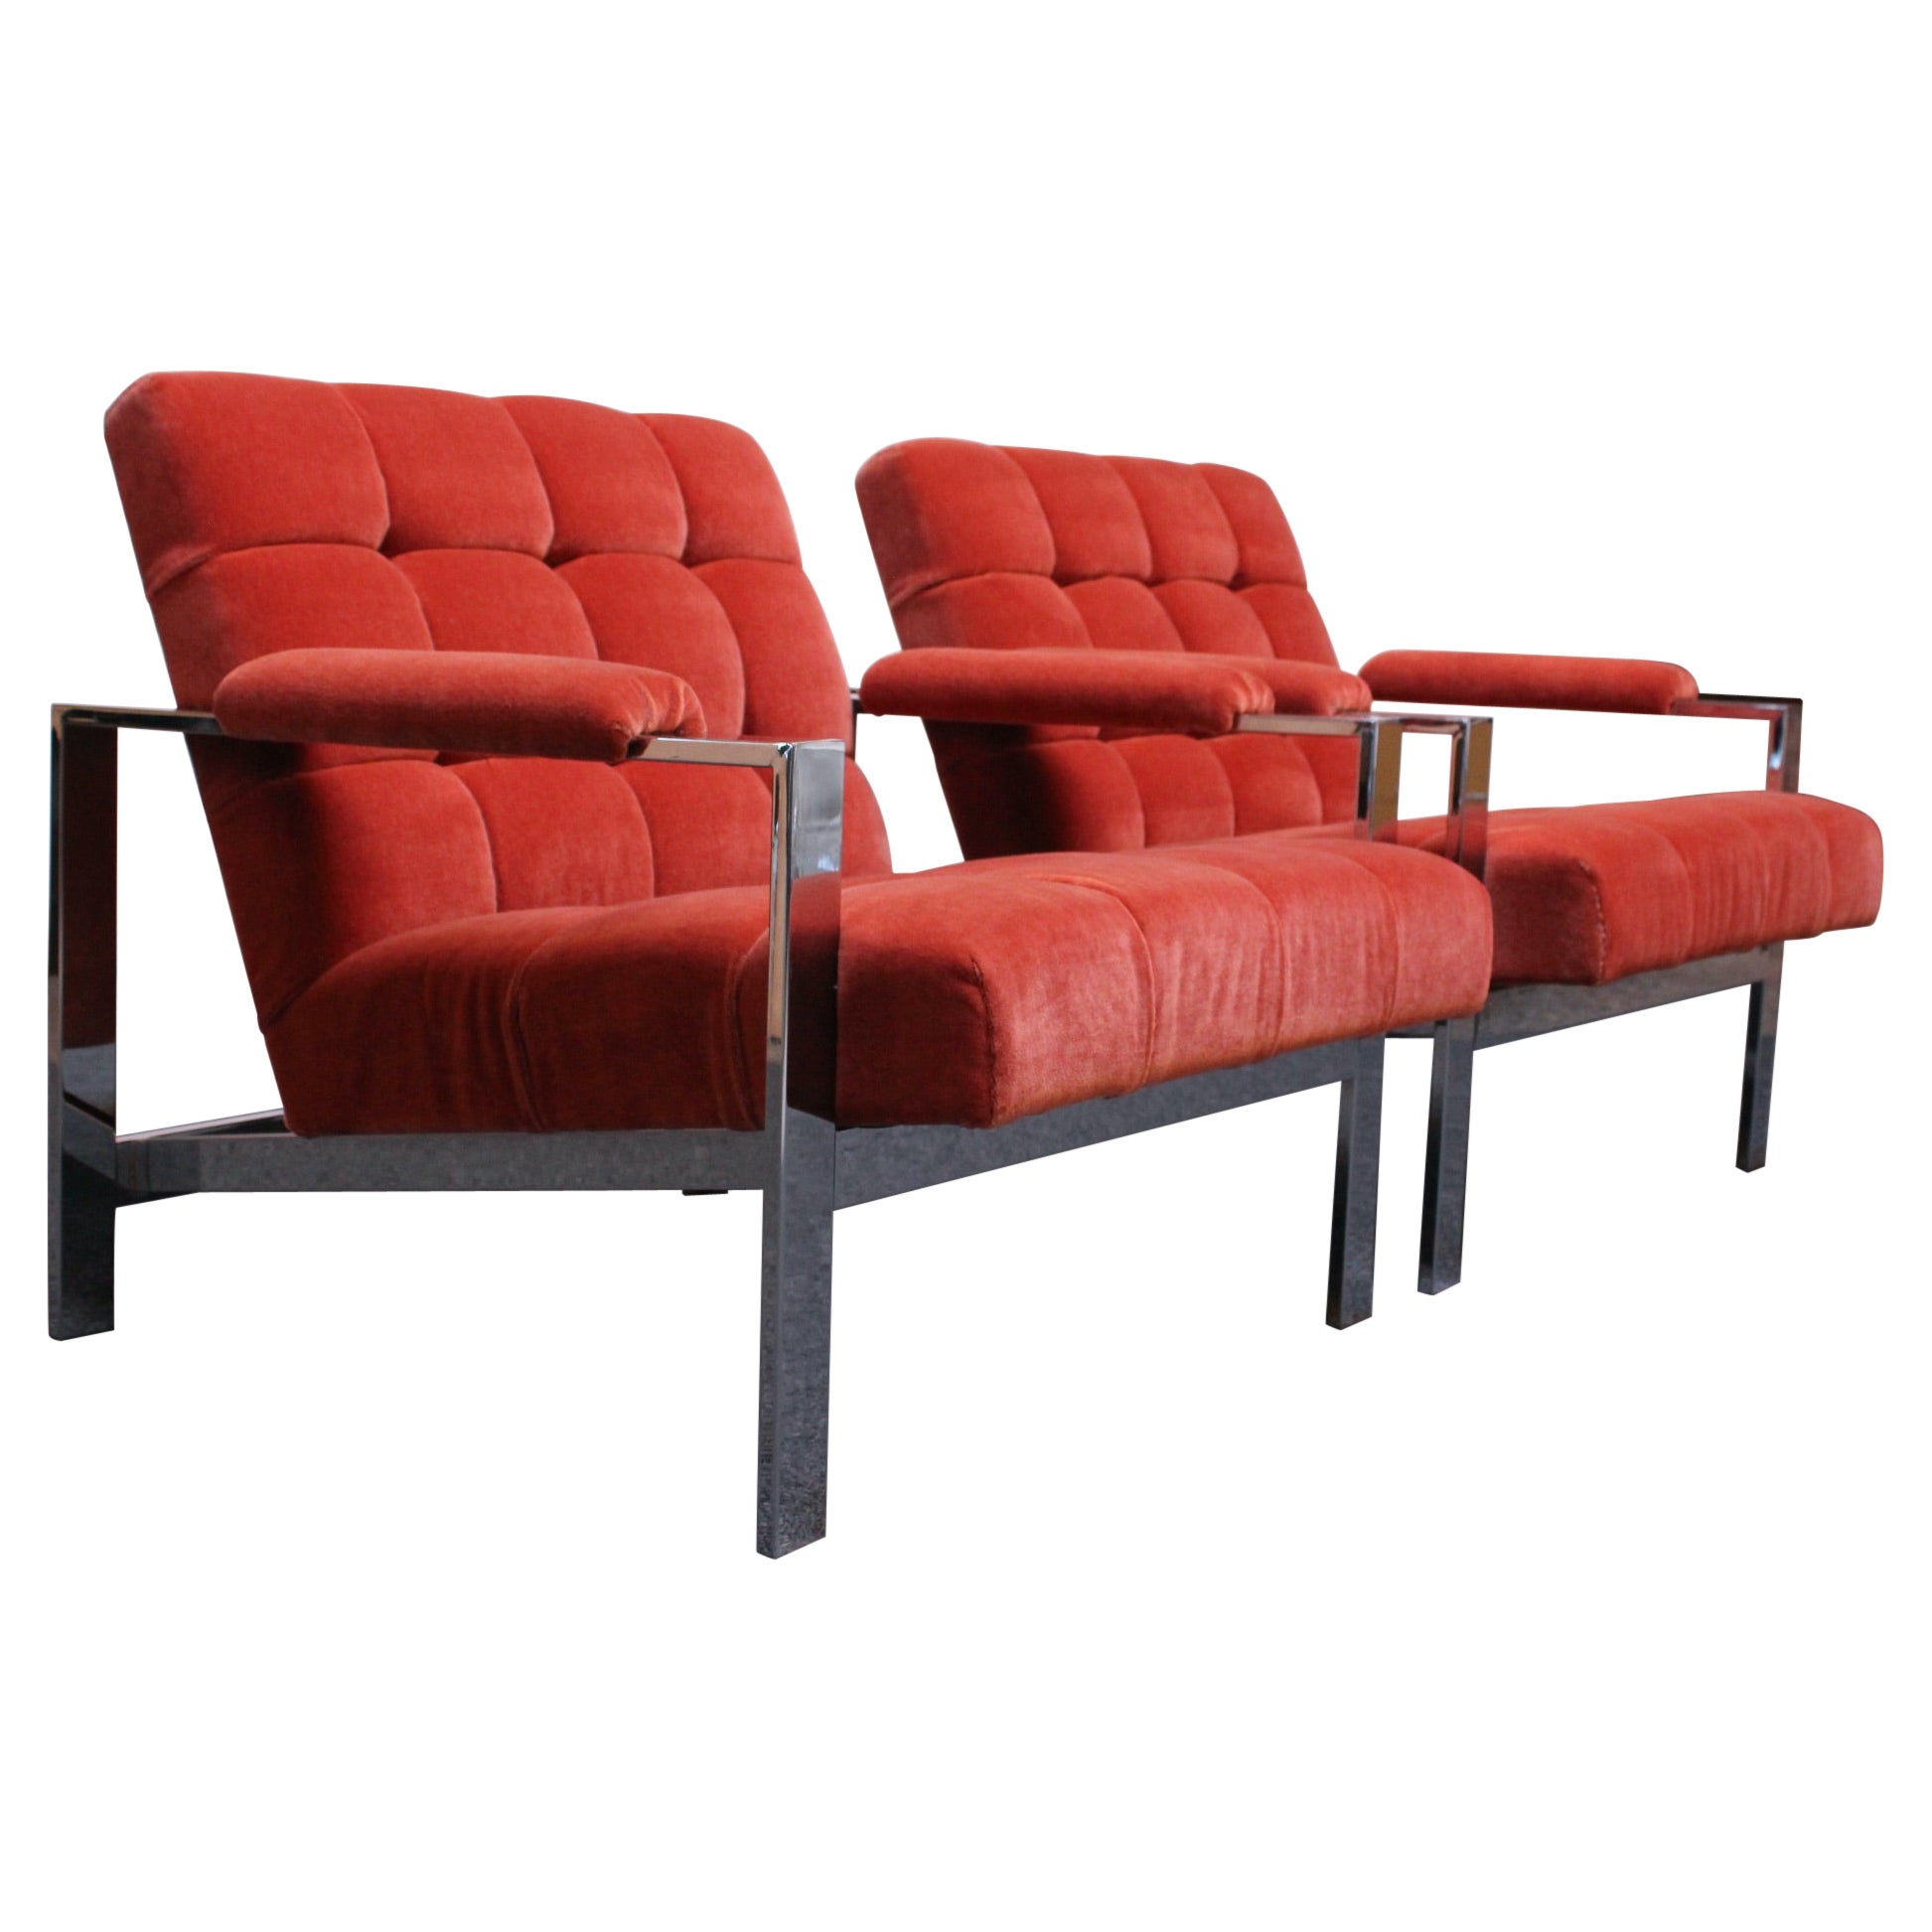 Mid-Century Italian Modern Tufted Mohair and Chrome Lounge Chairs